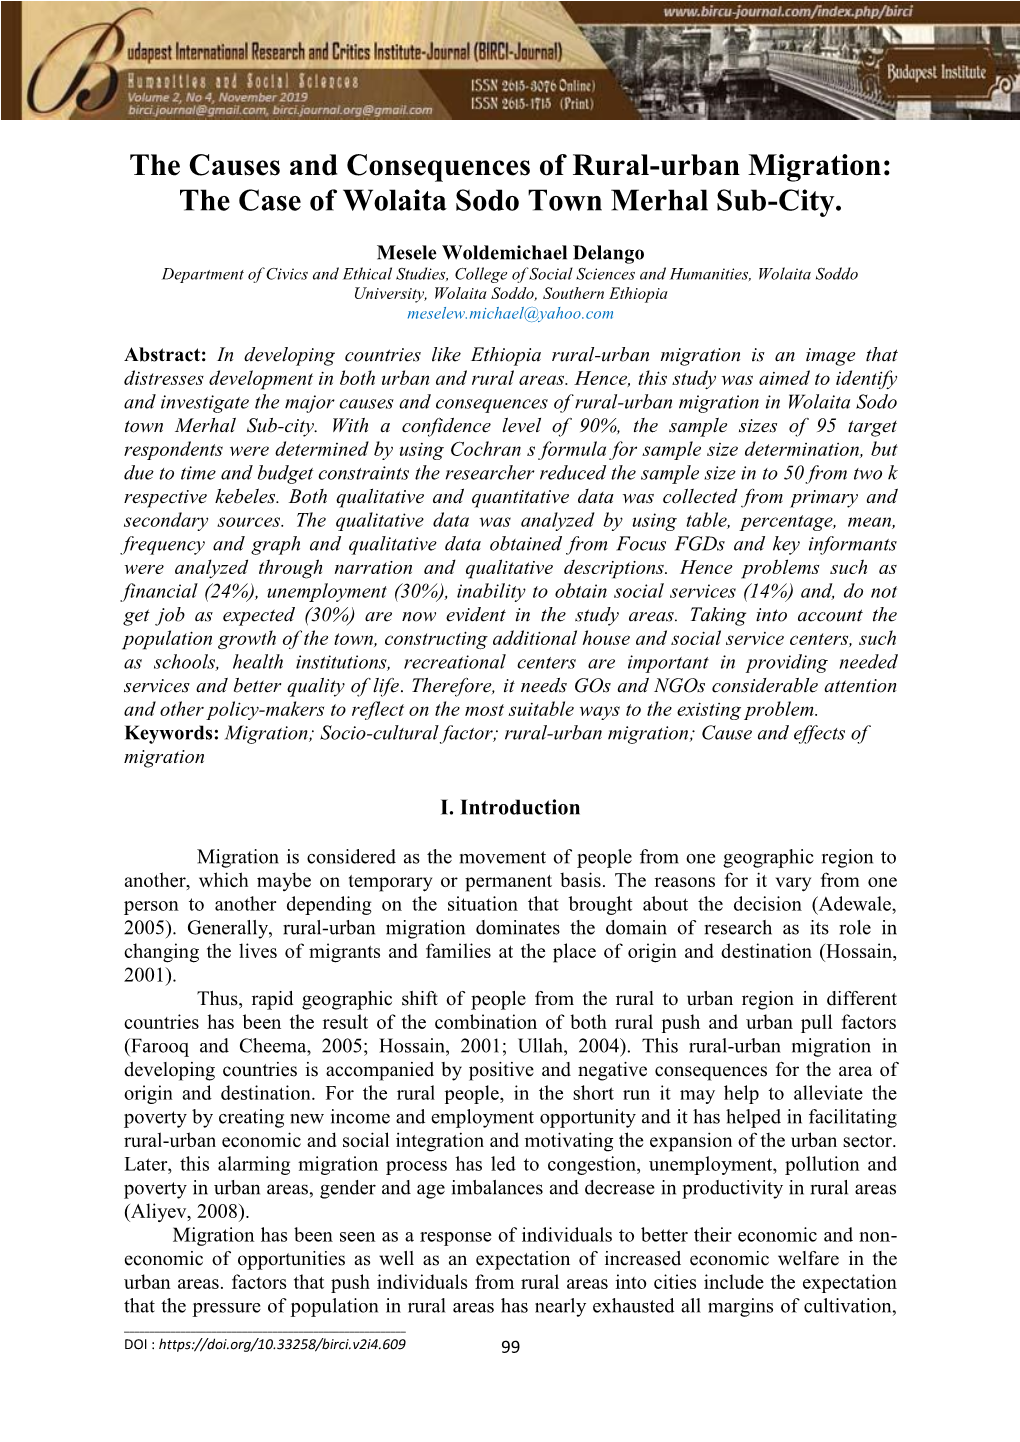 The Causes and Consequences of Rural-Urban Migration: the Case of Wolaita Sodo Town Merhal Sub-City